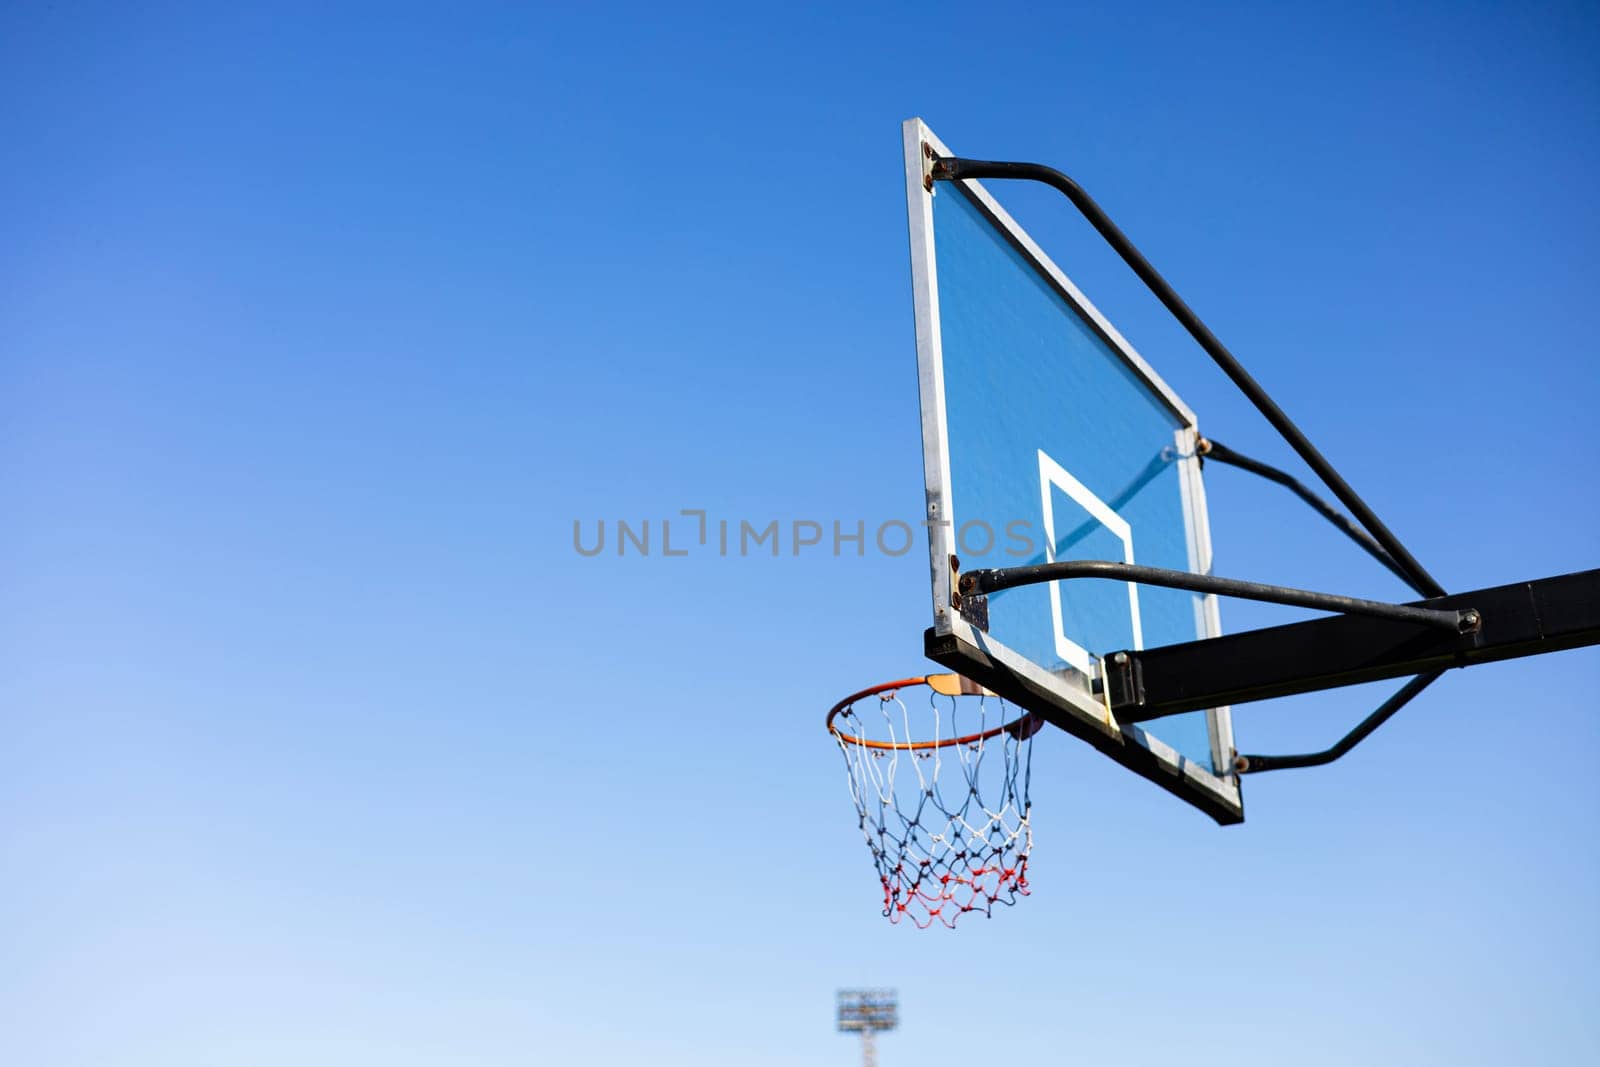 Outdoor Basketball hoop with blue sky background in the public arena.